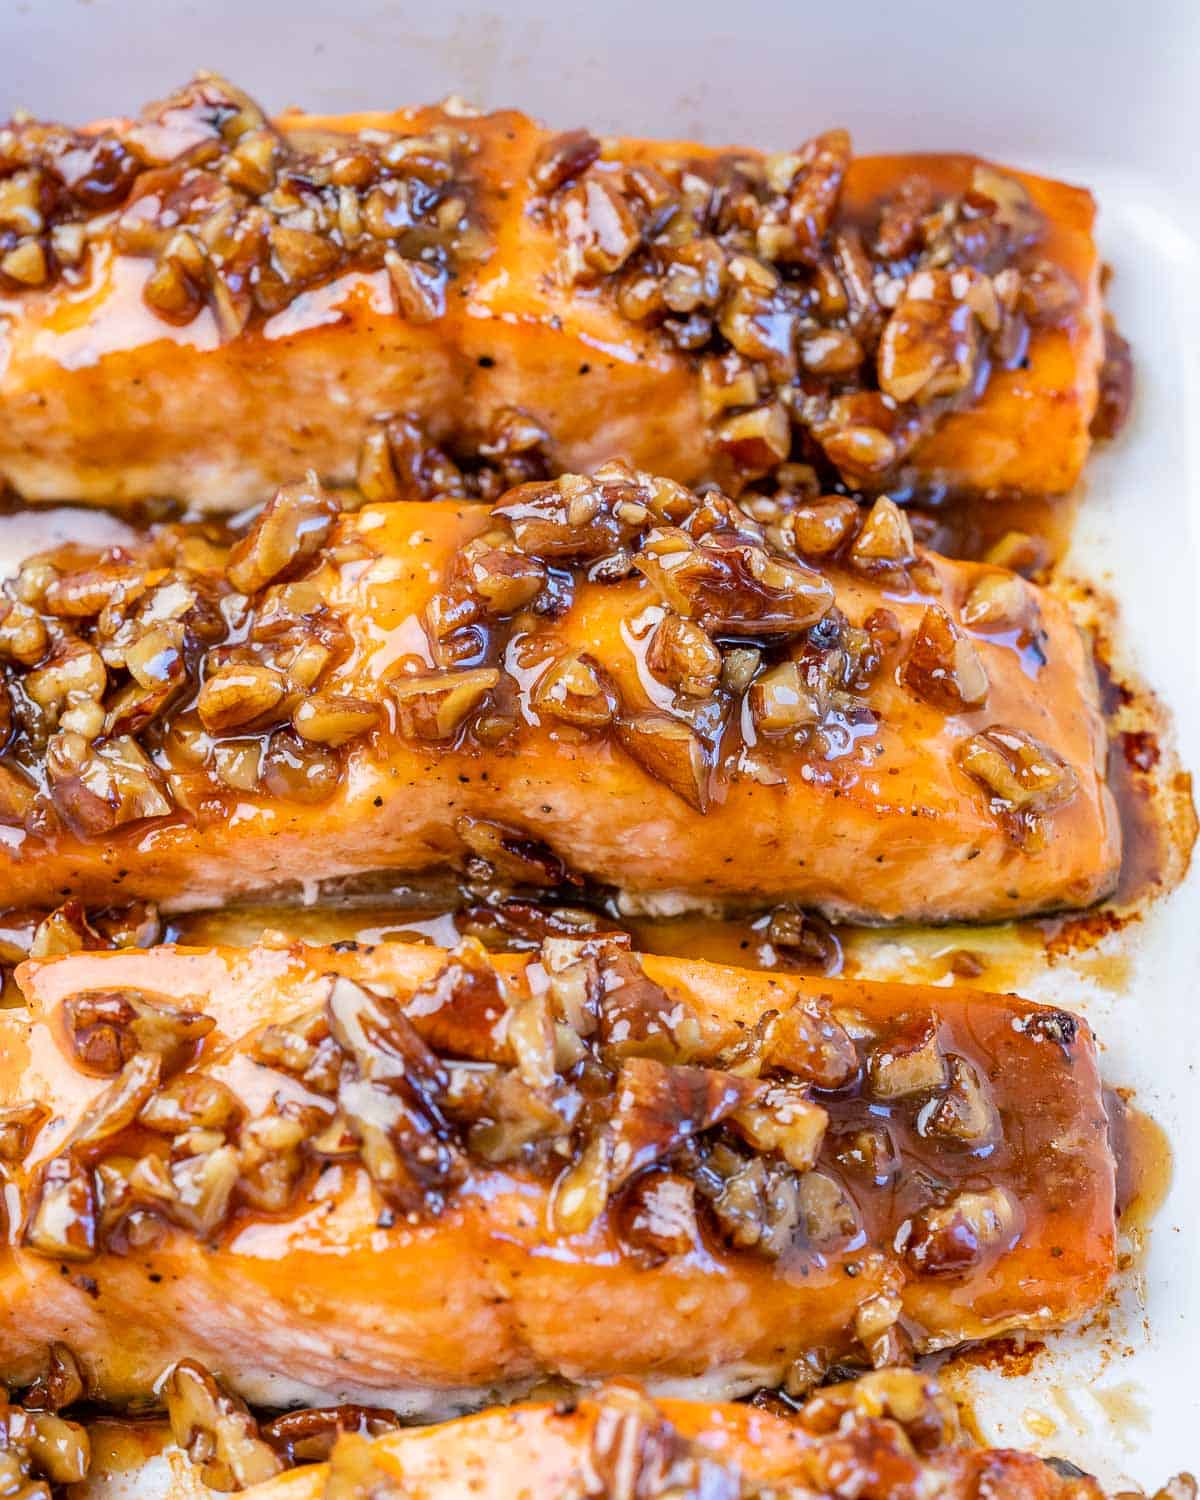 Filets of salmon topped with a maple pecan glaze in a white dish.